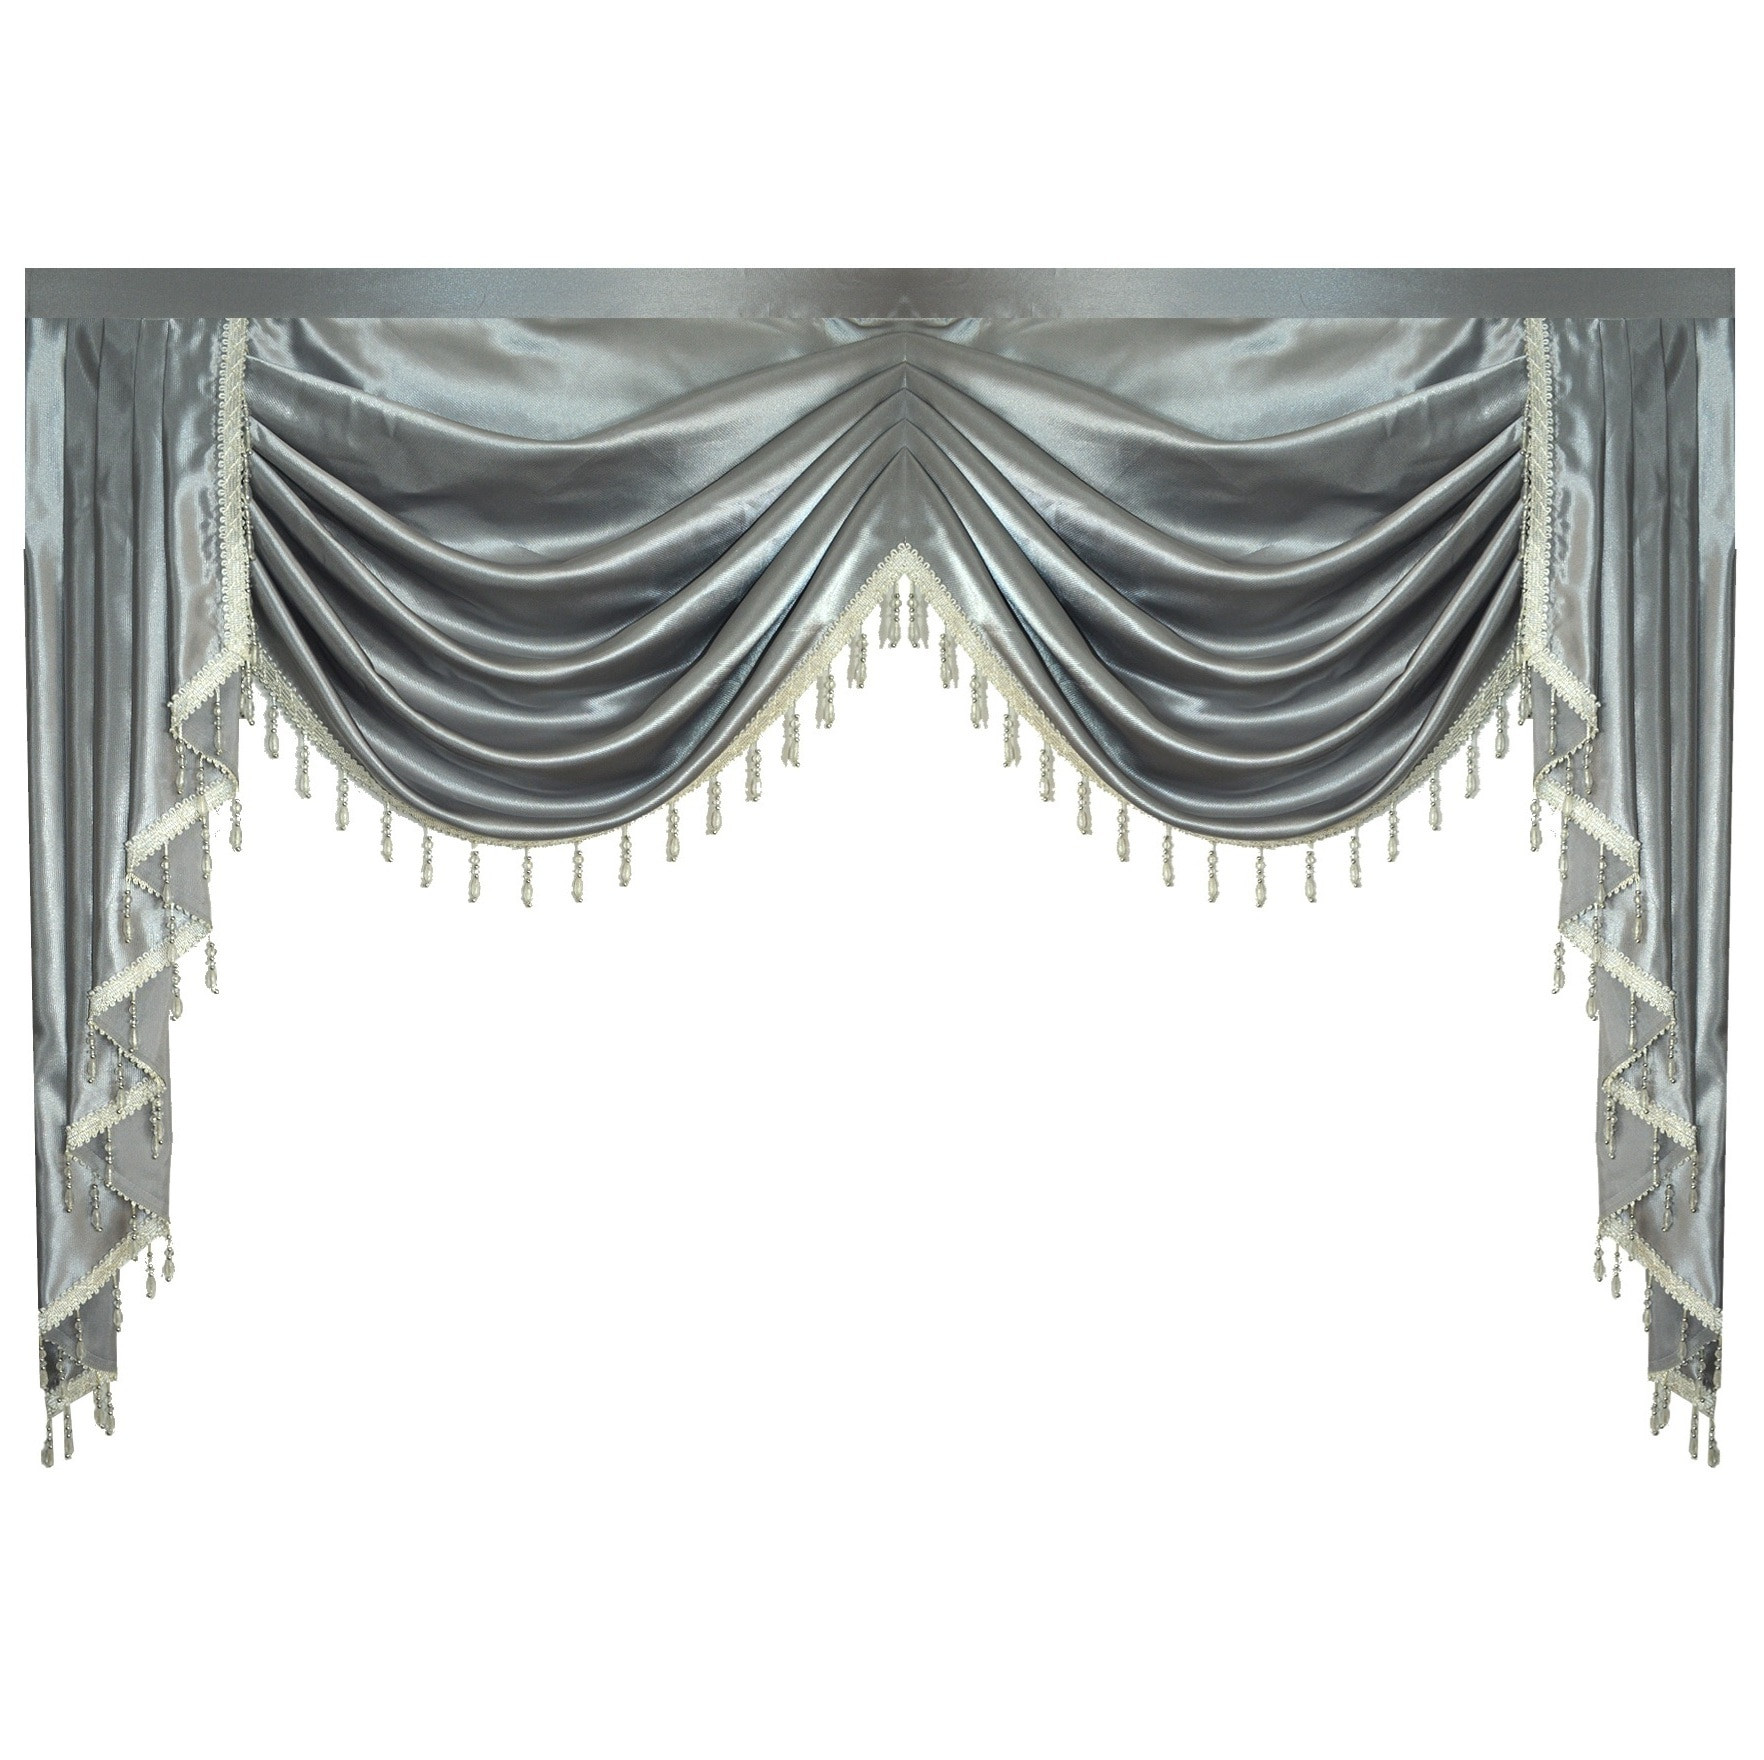 Swag Curtains For Living Room
 Valance Pure Grey Luxury Color Lambrequin Curtains for